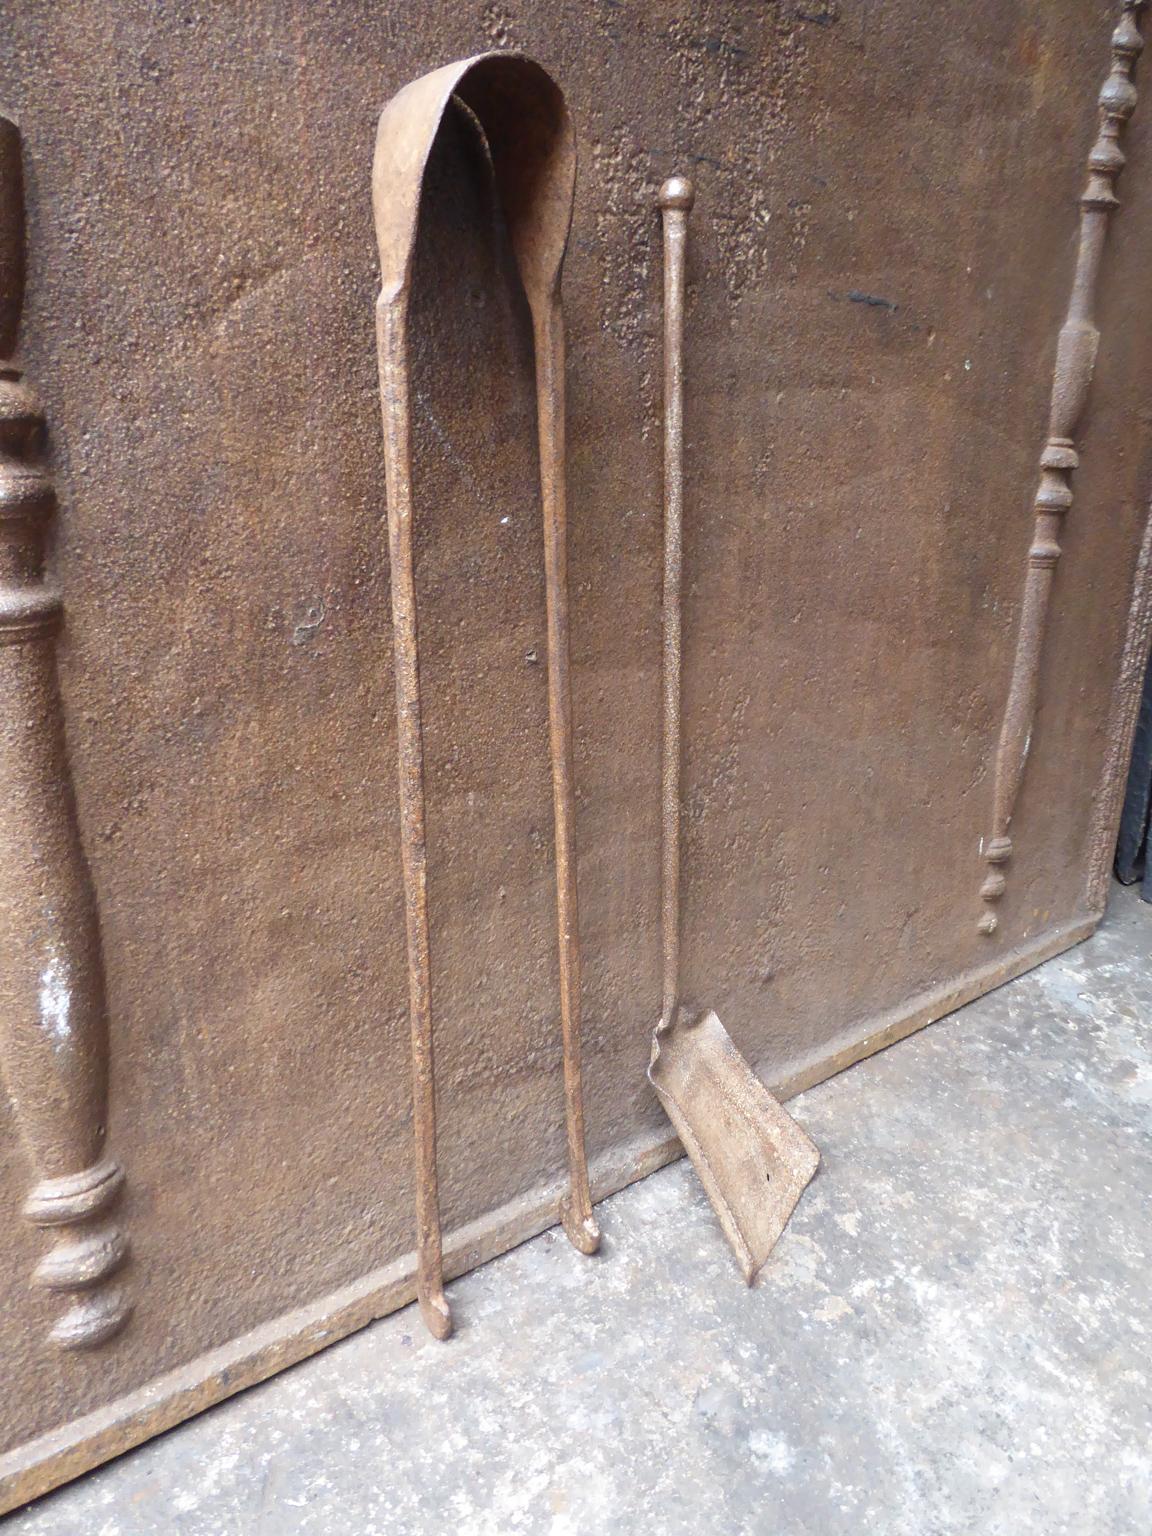 17th-18th century French Louis XV fireplace tool set consisting of fireplace tongs and a shovel. The fire irons are made of wrought iron. They are in a good condition and are fully functional.